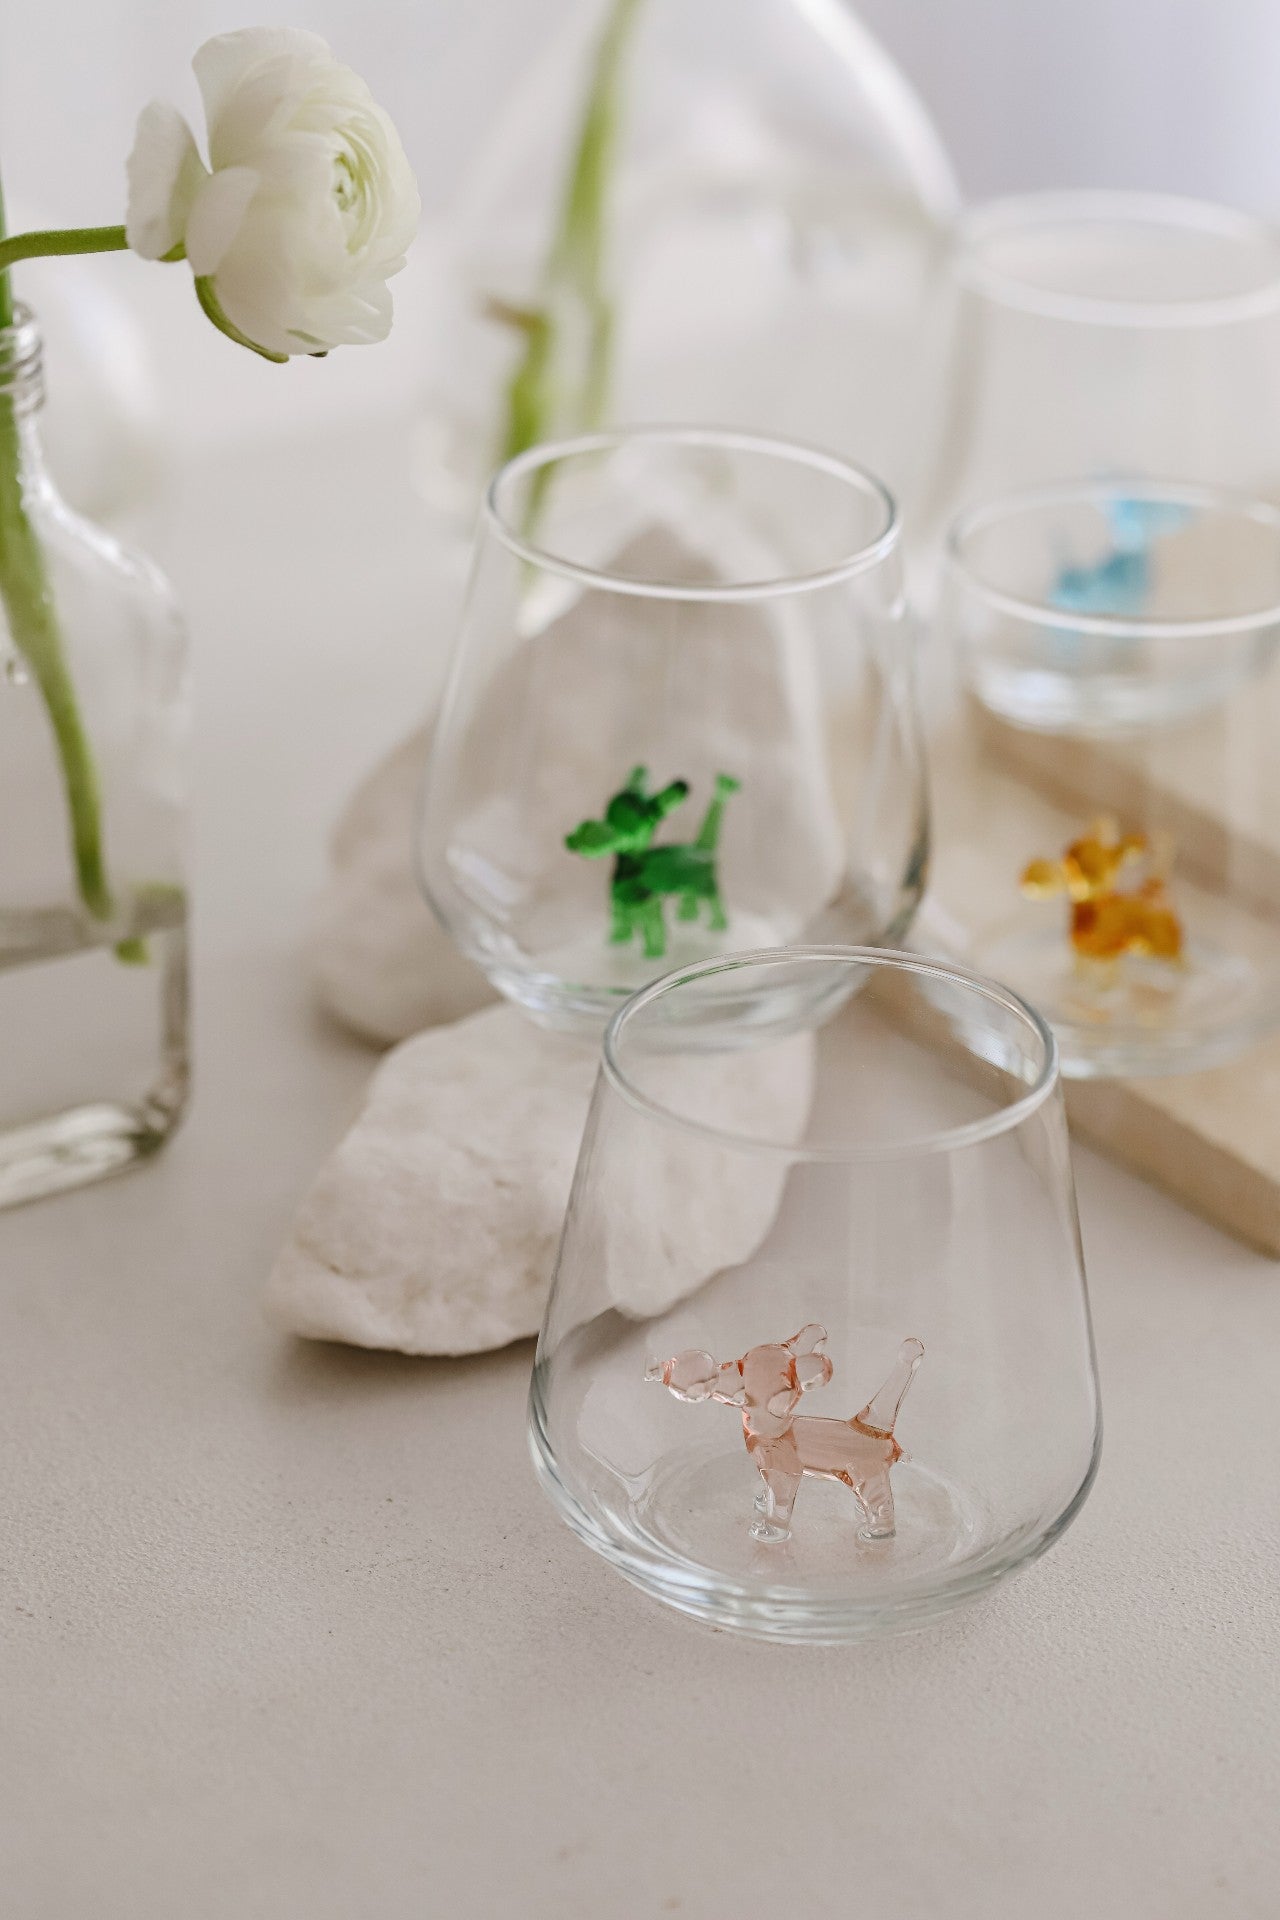 Drinking Glass set of 6 with Balloon Dog Figures